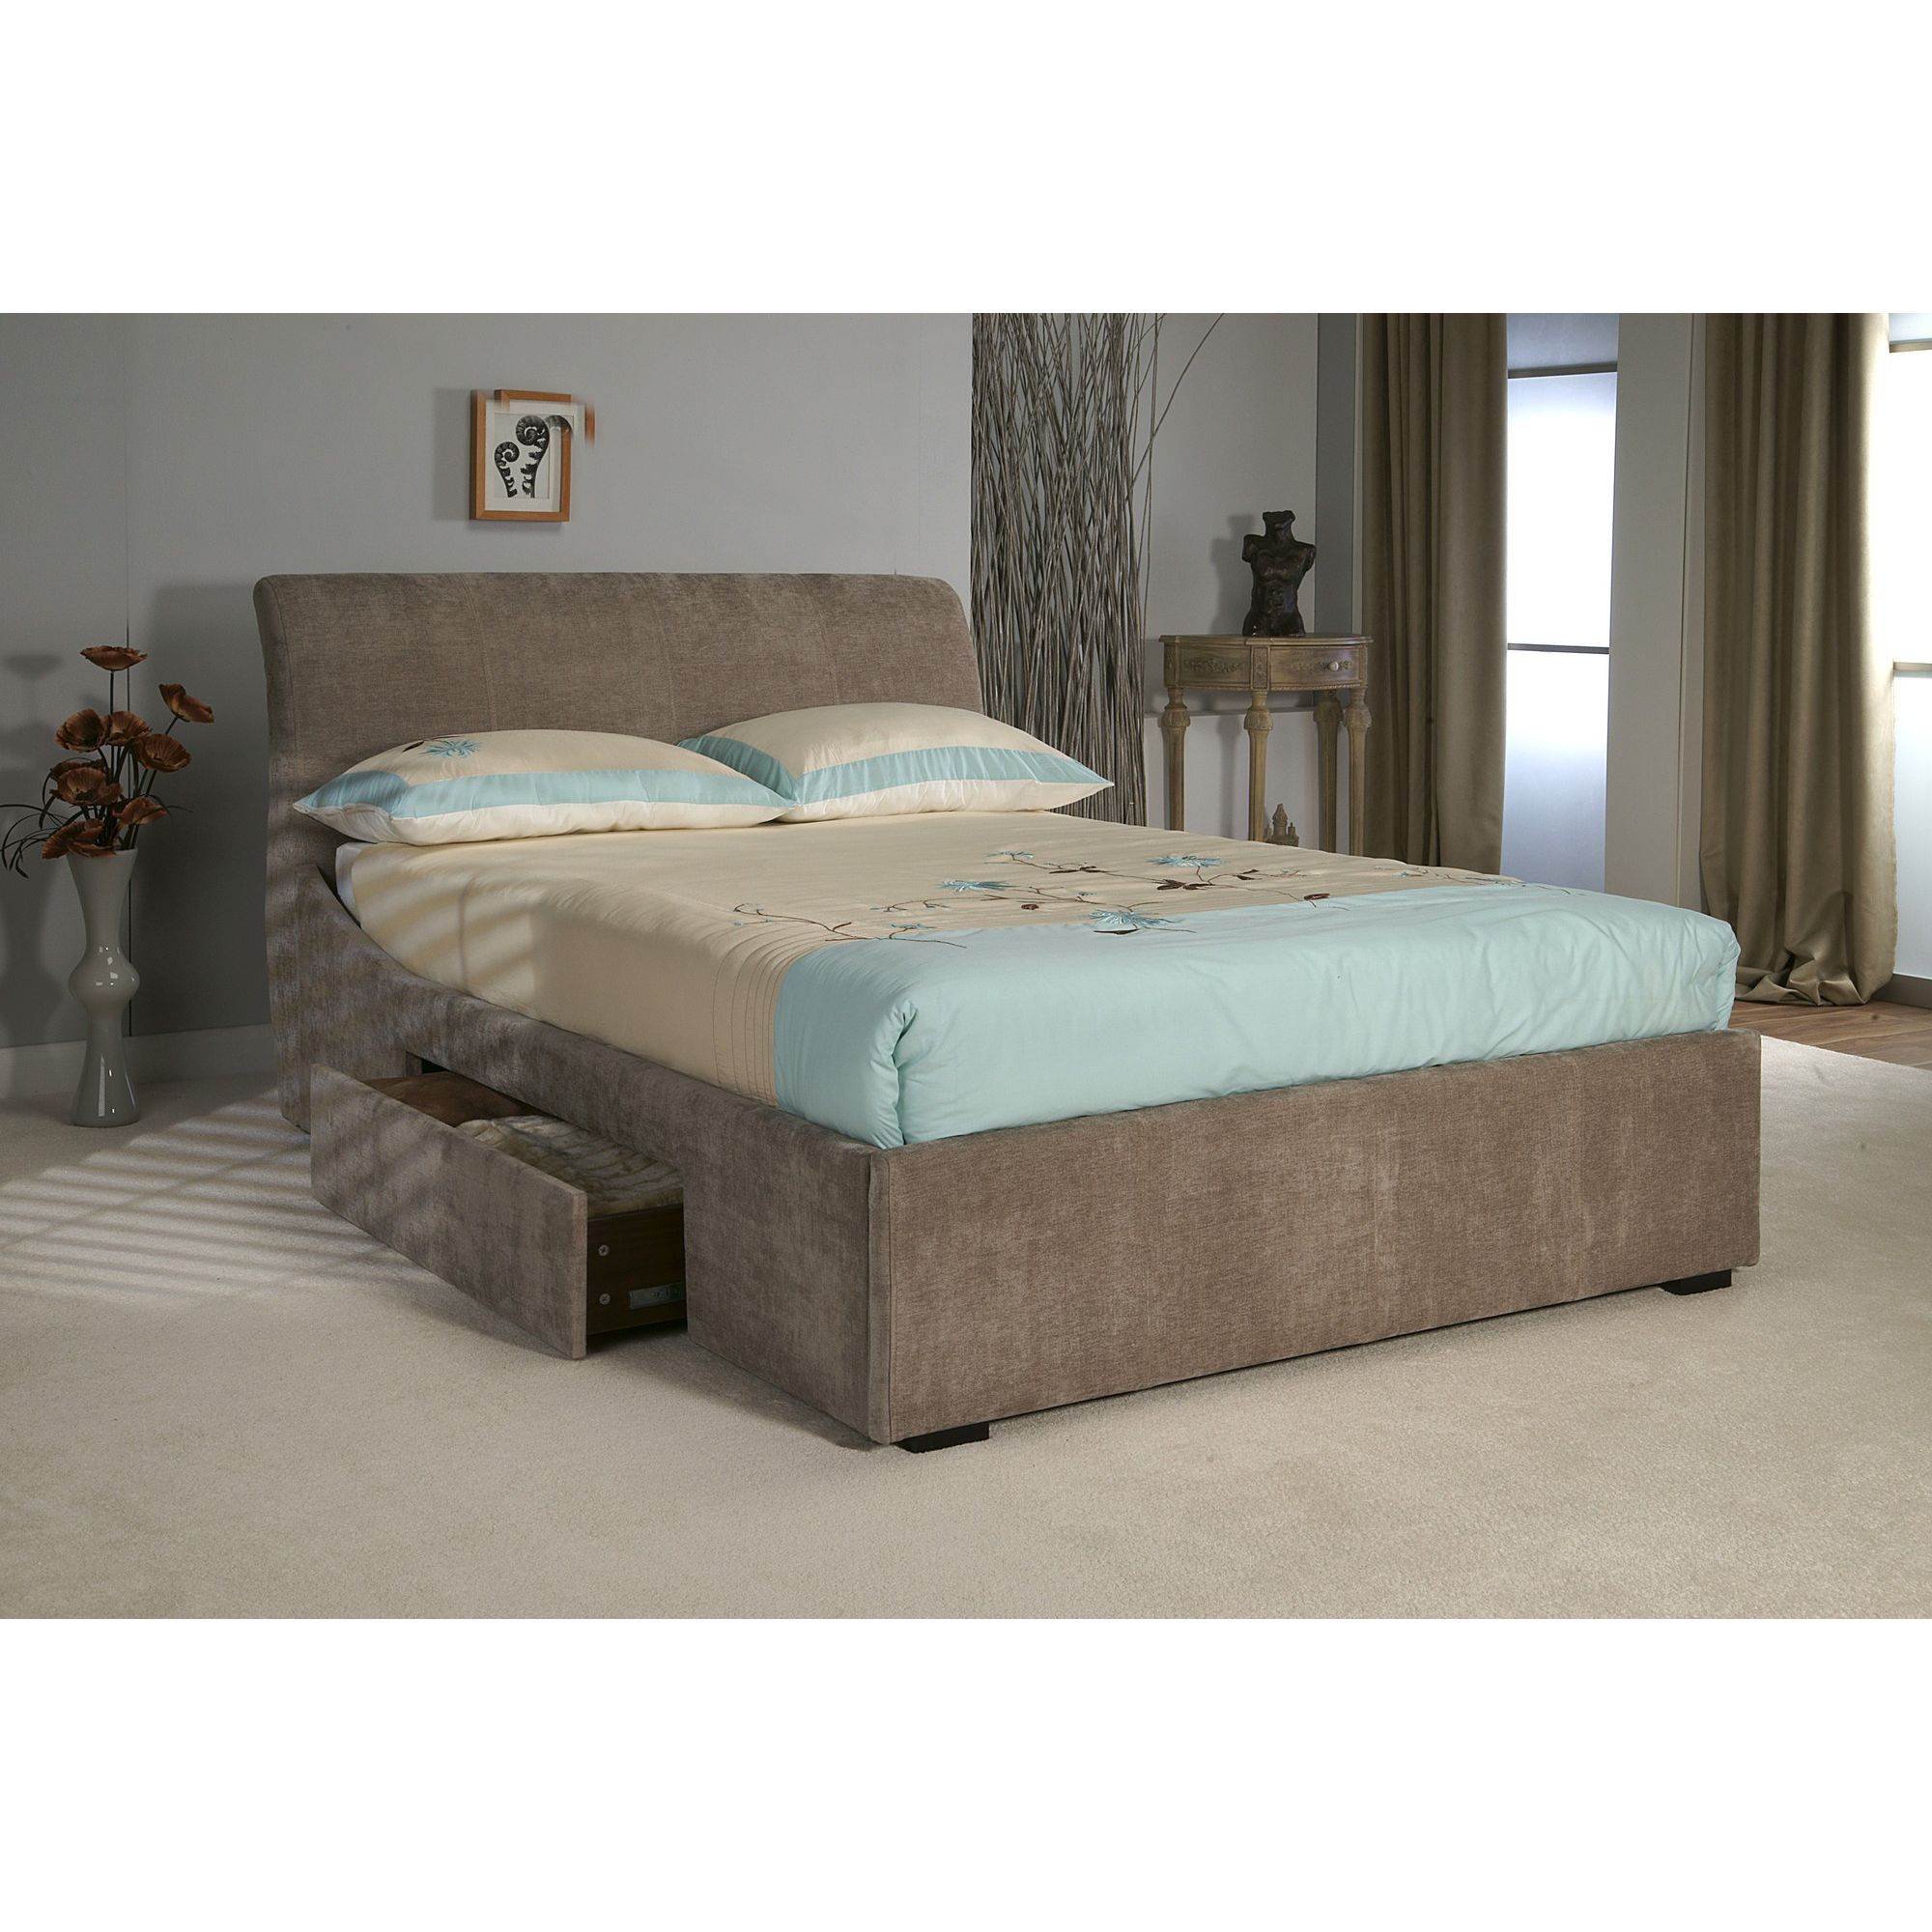 Limelight Oberon Bedstead with Storage - King at Tesco Direct